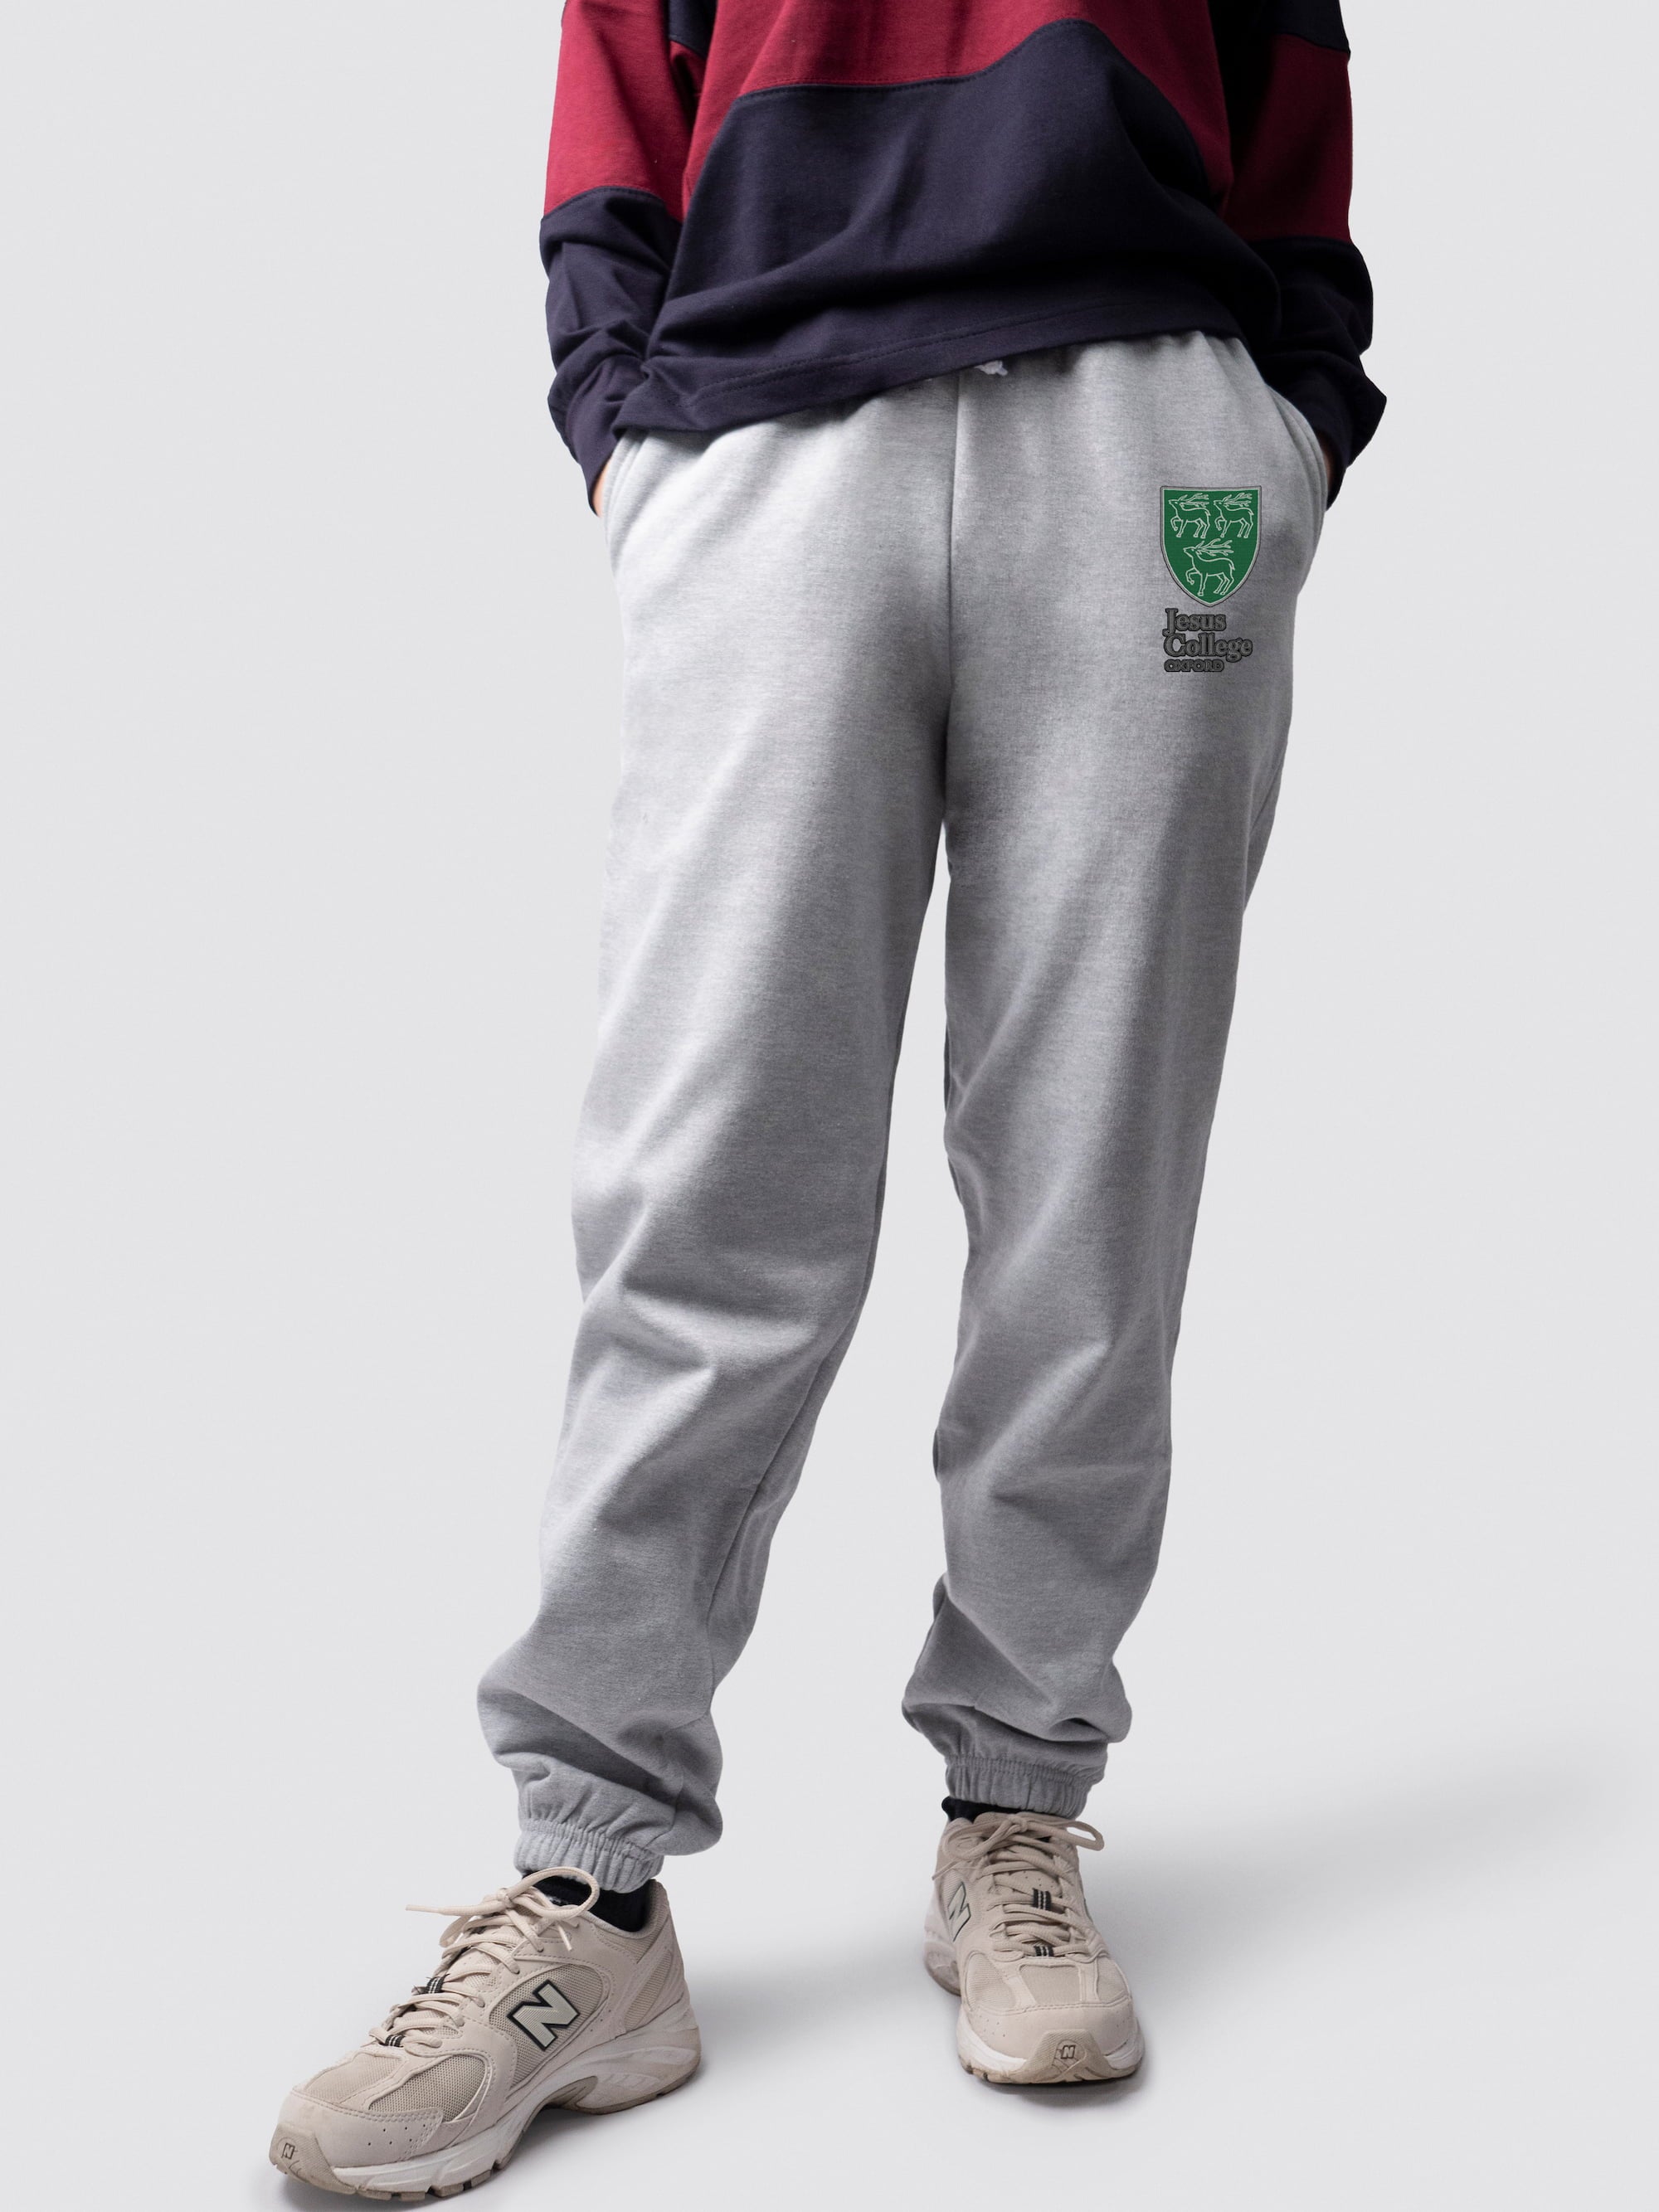 undergraduate cuffed sweatpants, made from soft cotton fabric, with Jesus College logo